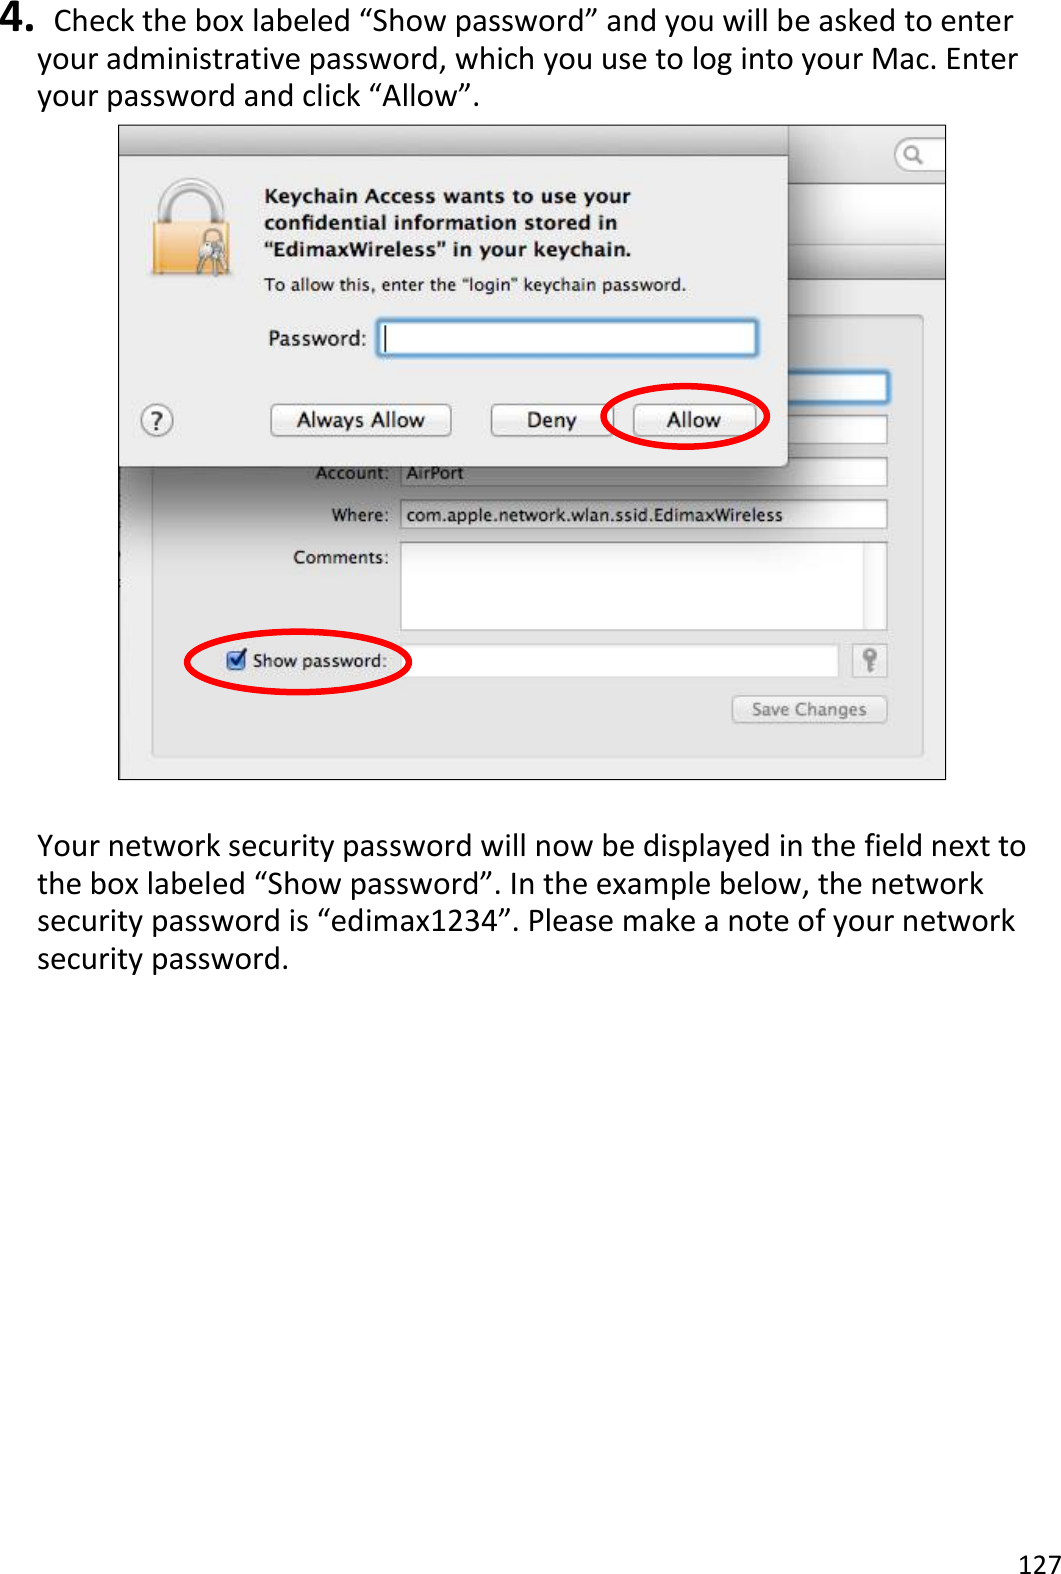 127  4.   Check the box labeled “Show password” and you will be asked to enter your administrative password, which you use to log into your Mac. Enter your password and click “Allow”.   Your network security password will now be displayed in the field next to the box labeled “Show password”. In the example below, the network security password is “edimax1234”. Please make a note of your network security password.  